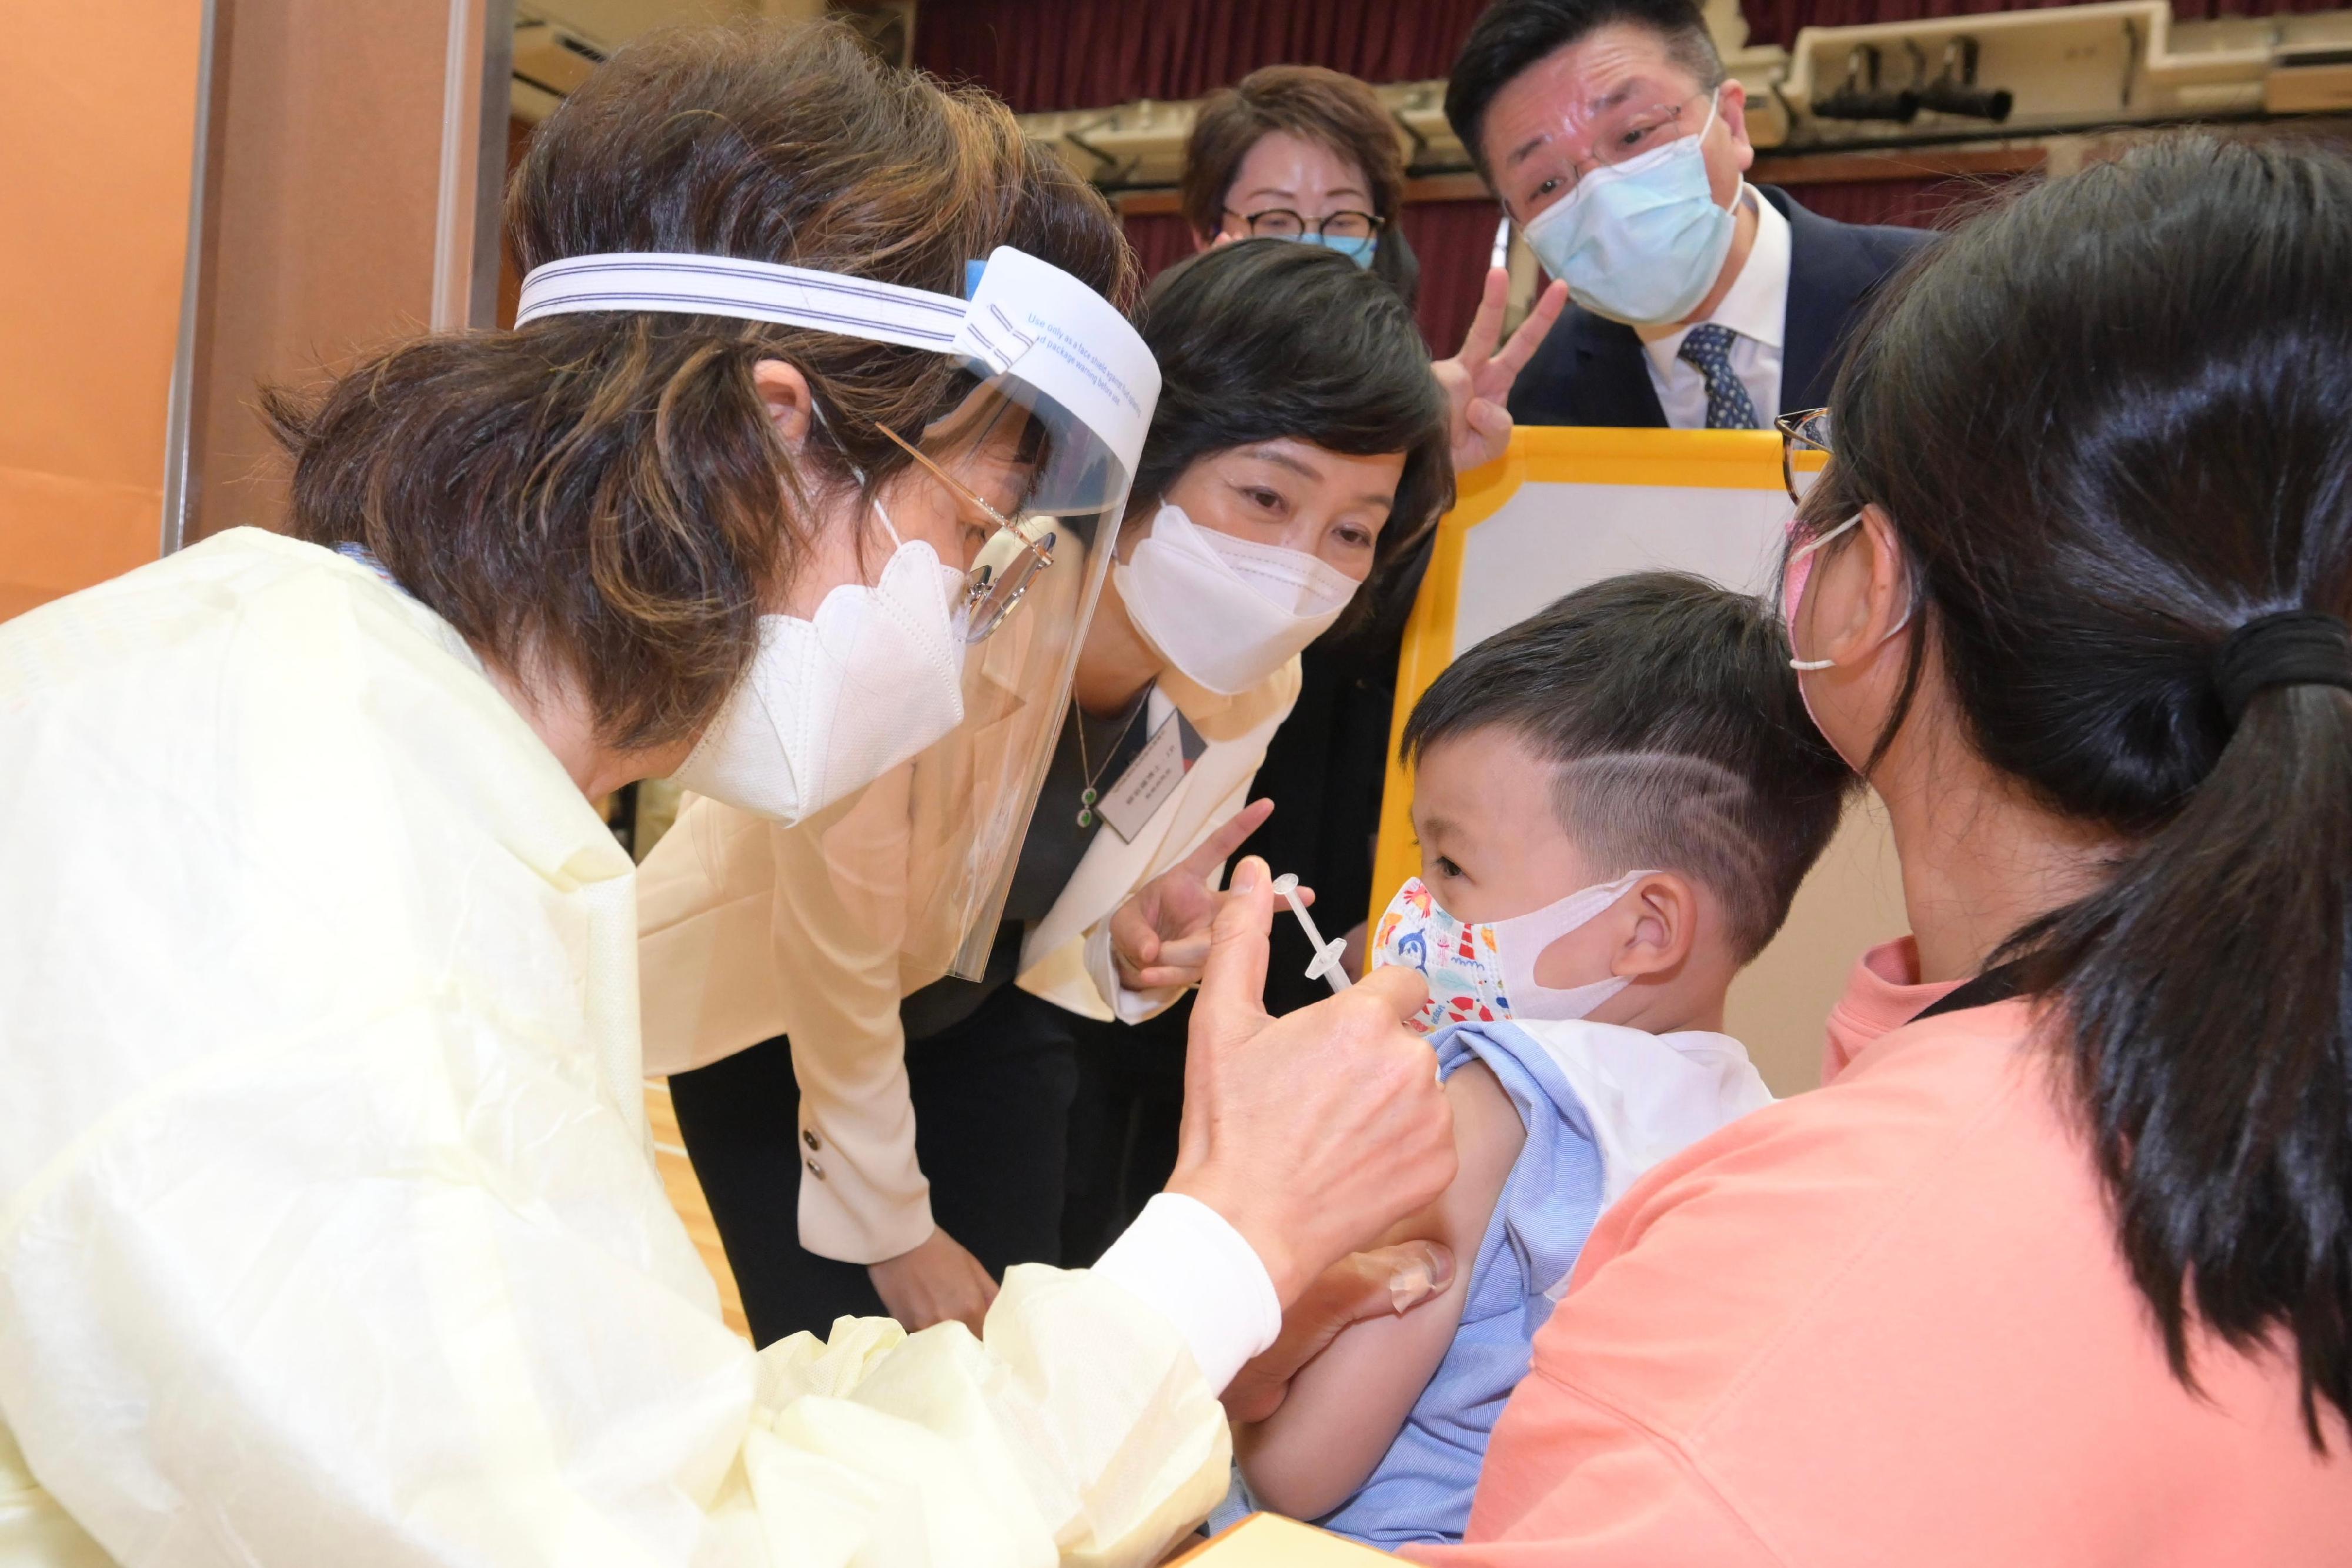 The Secretary for Education, Dr Choi Yuk-lin, visited TWGHs Yau Tze Tin Memorial College today (August 5) to attend the "School Vaccination Day" activity, which was organised by the Education Bureau and a school sponsoring body for the first time. Photo shows Dr Choi (second left) accompanying a student receiving a COVID-19 vaccination.